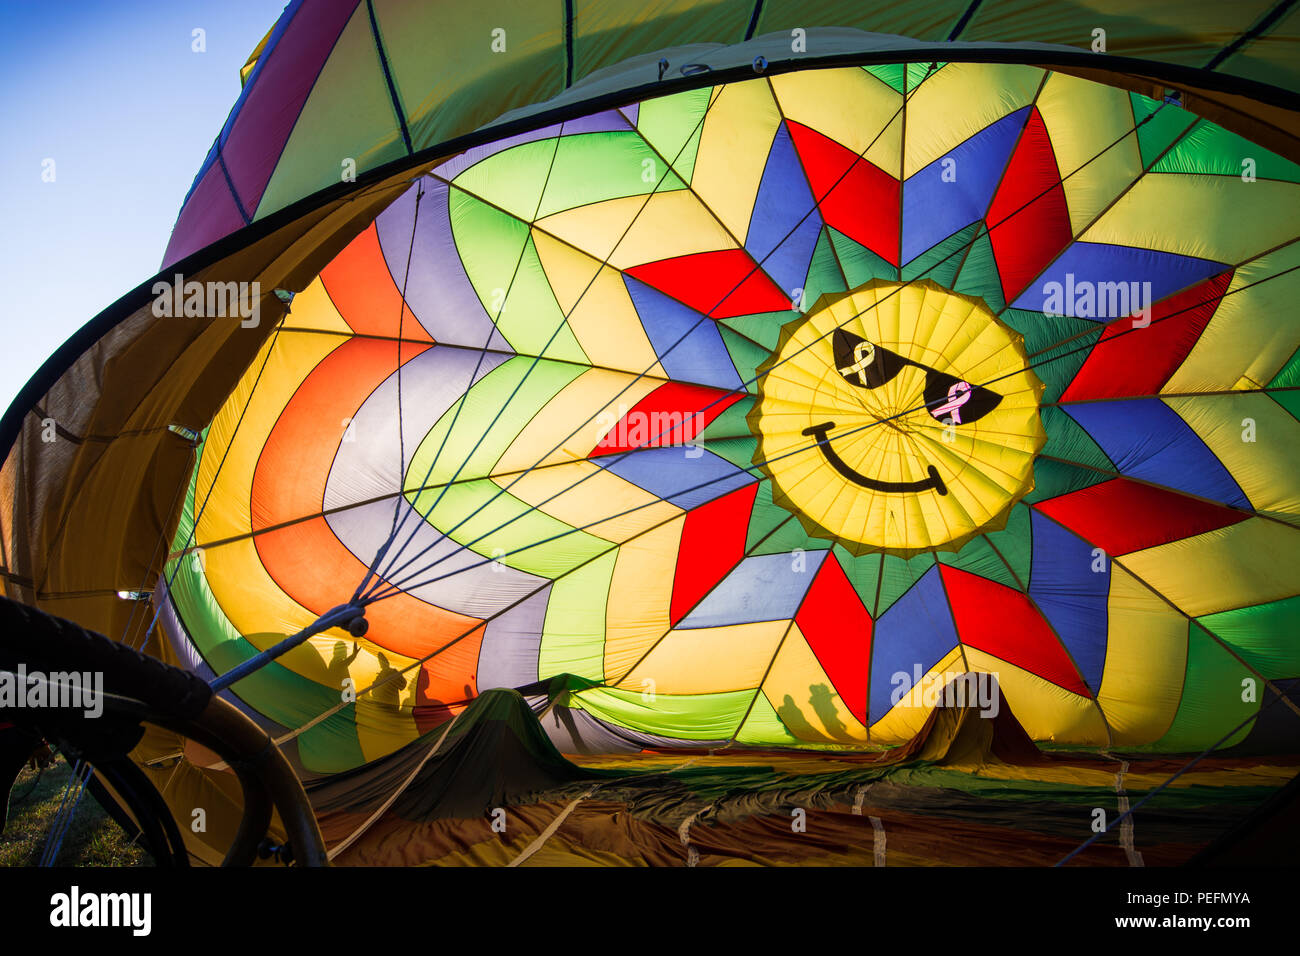 A hot air balloon with a colorful smiley face being inflated just before the start of the Great Reno Balloon Race in 2017. Stock Photo